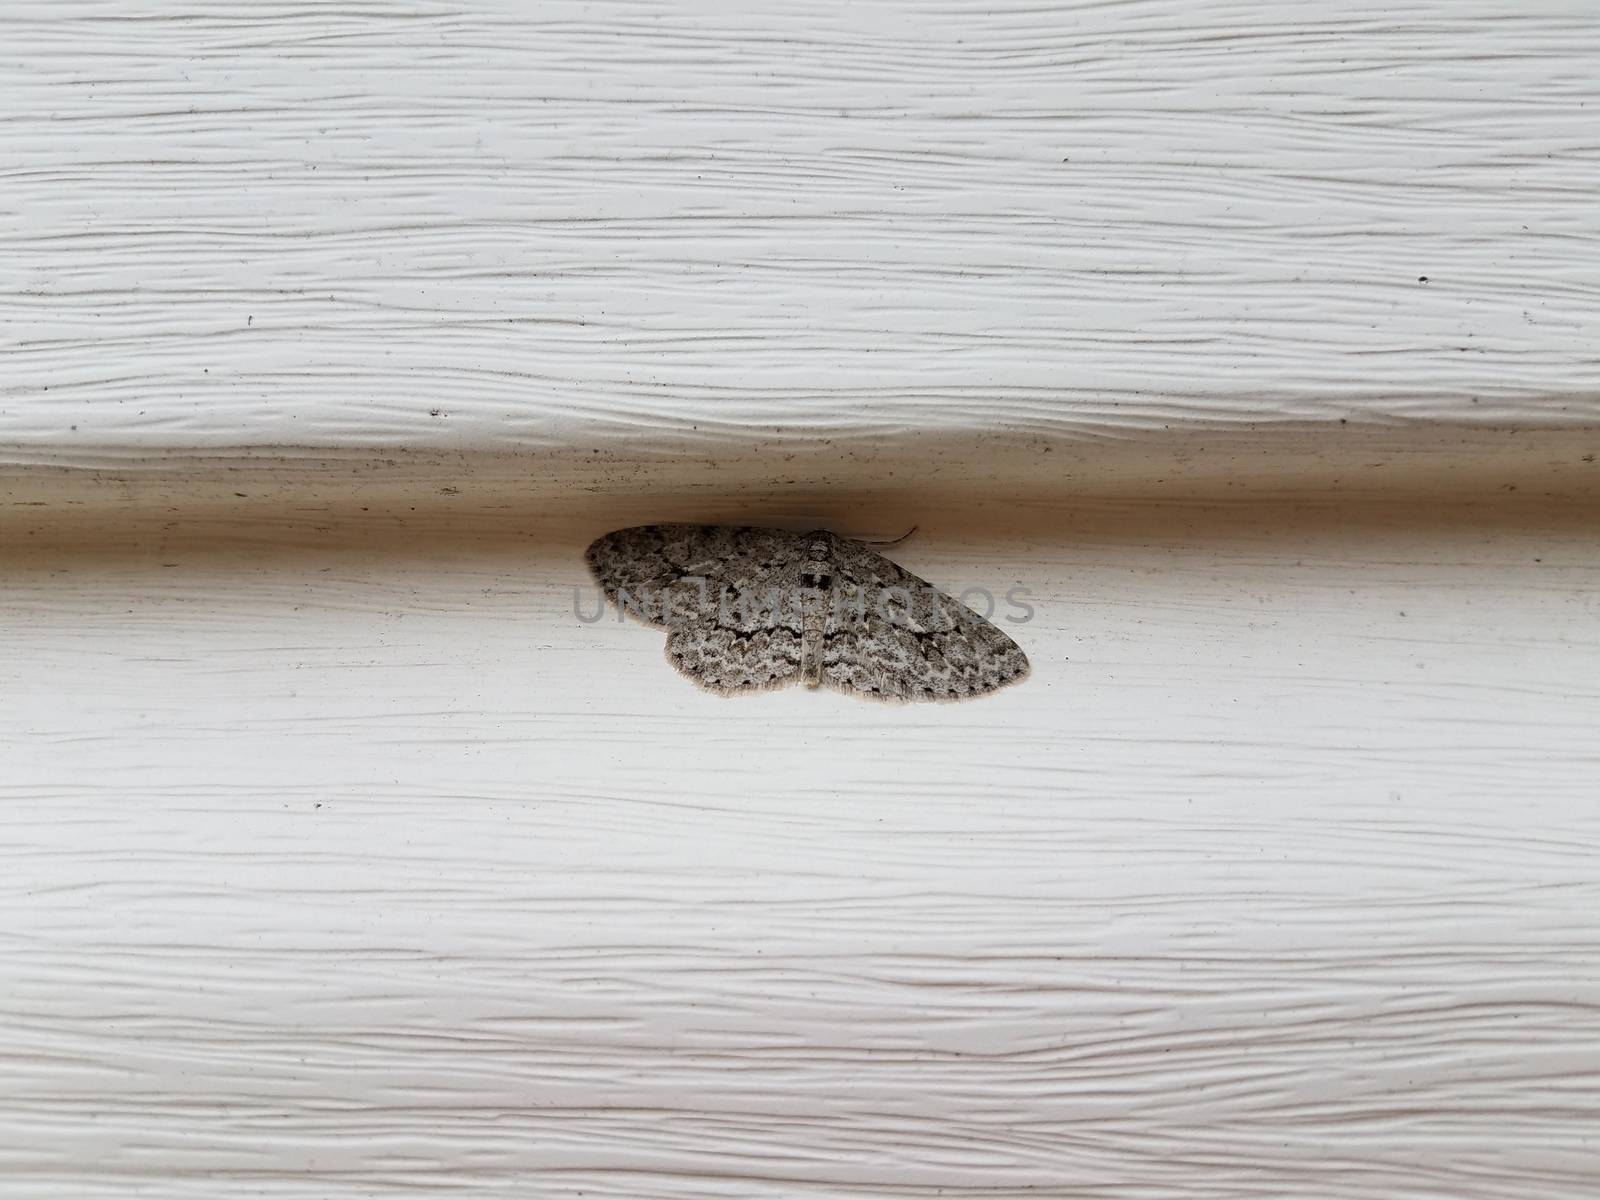 grey moth insect under white home siding by stockphotofan1